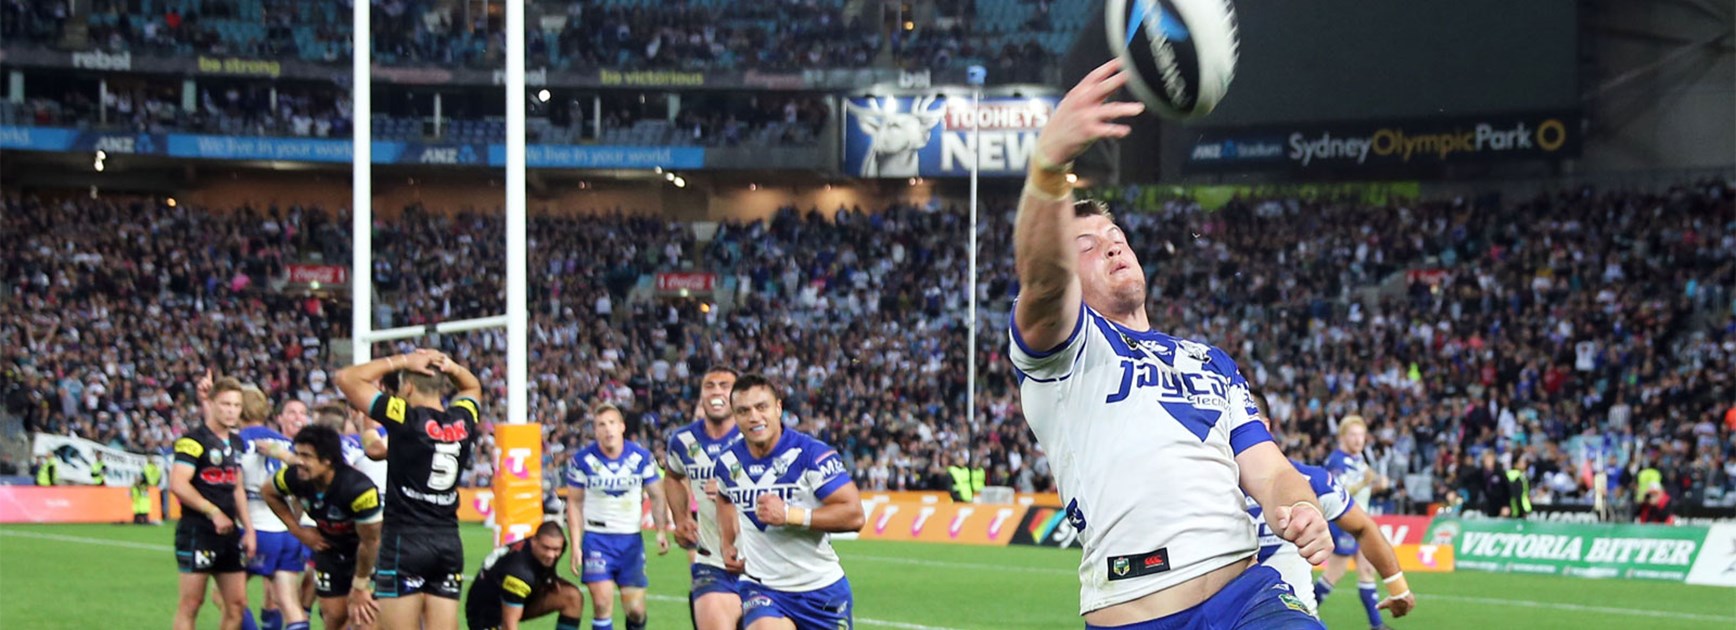 Josh Morris celebrates scoring in last year's finals clash against the Panthers.